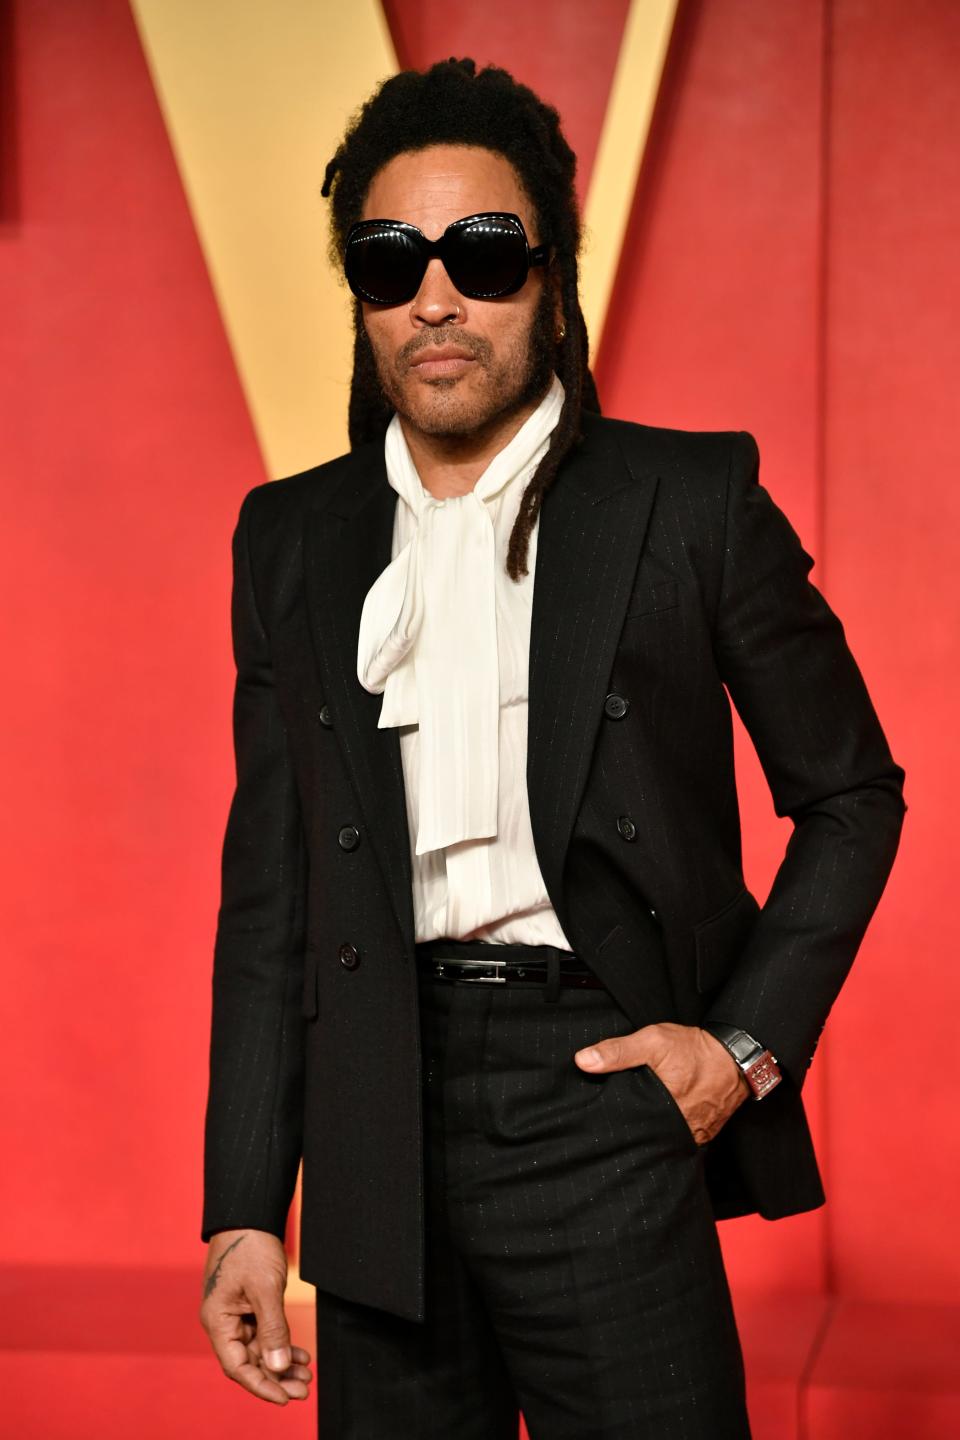 Lenny Kravitz attends the Vanity Fair Oscars party following the March 10 ceremony in Los Angeles.